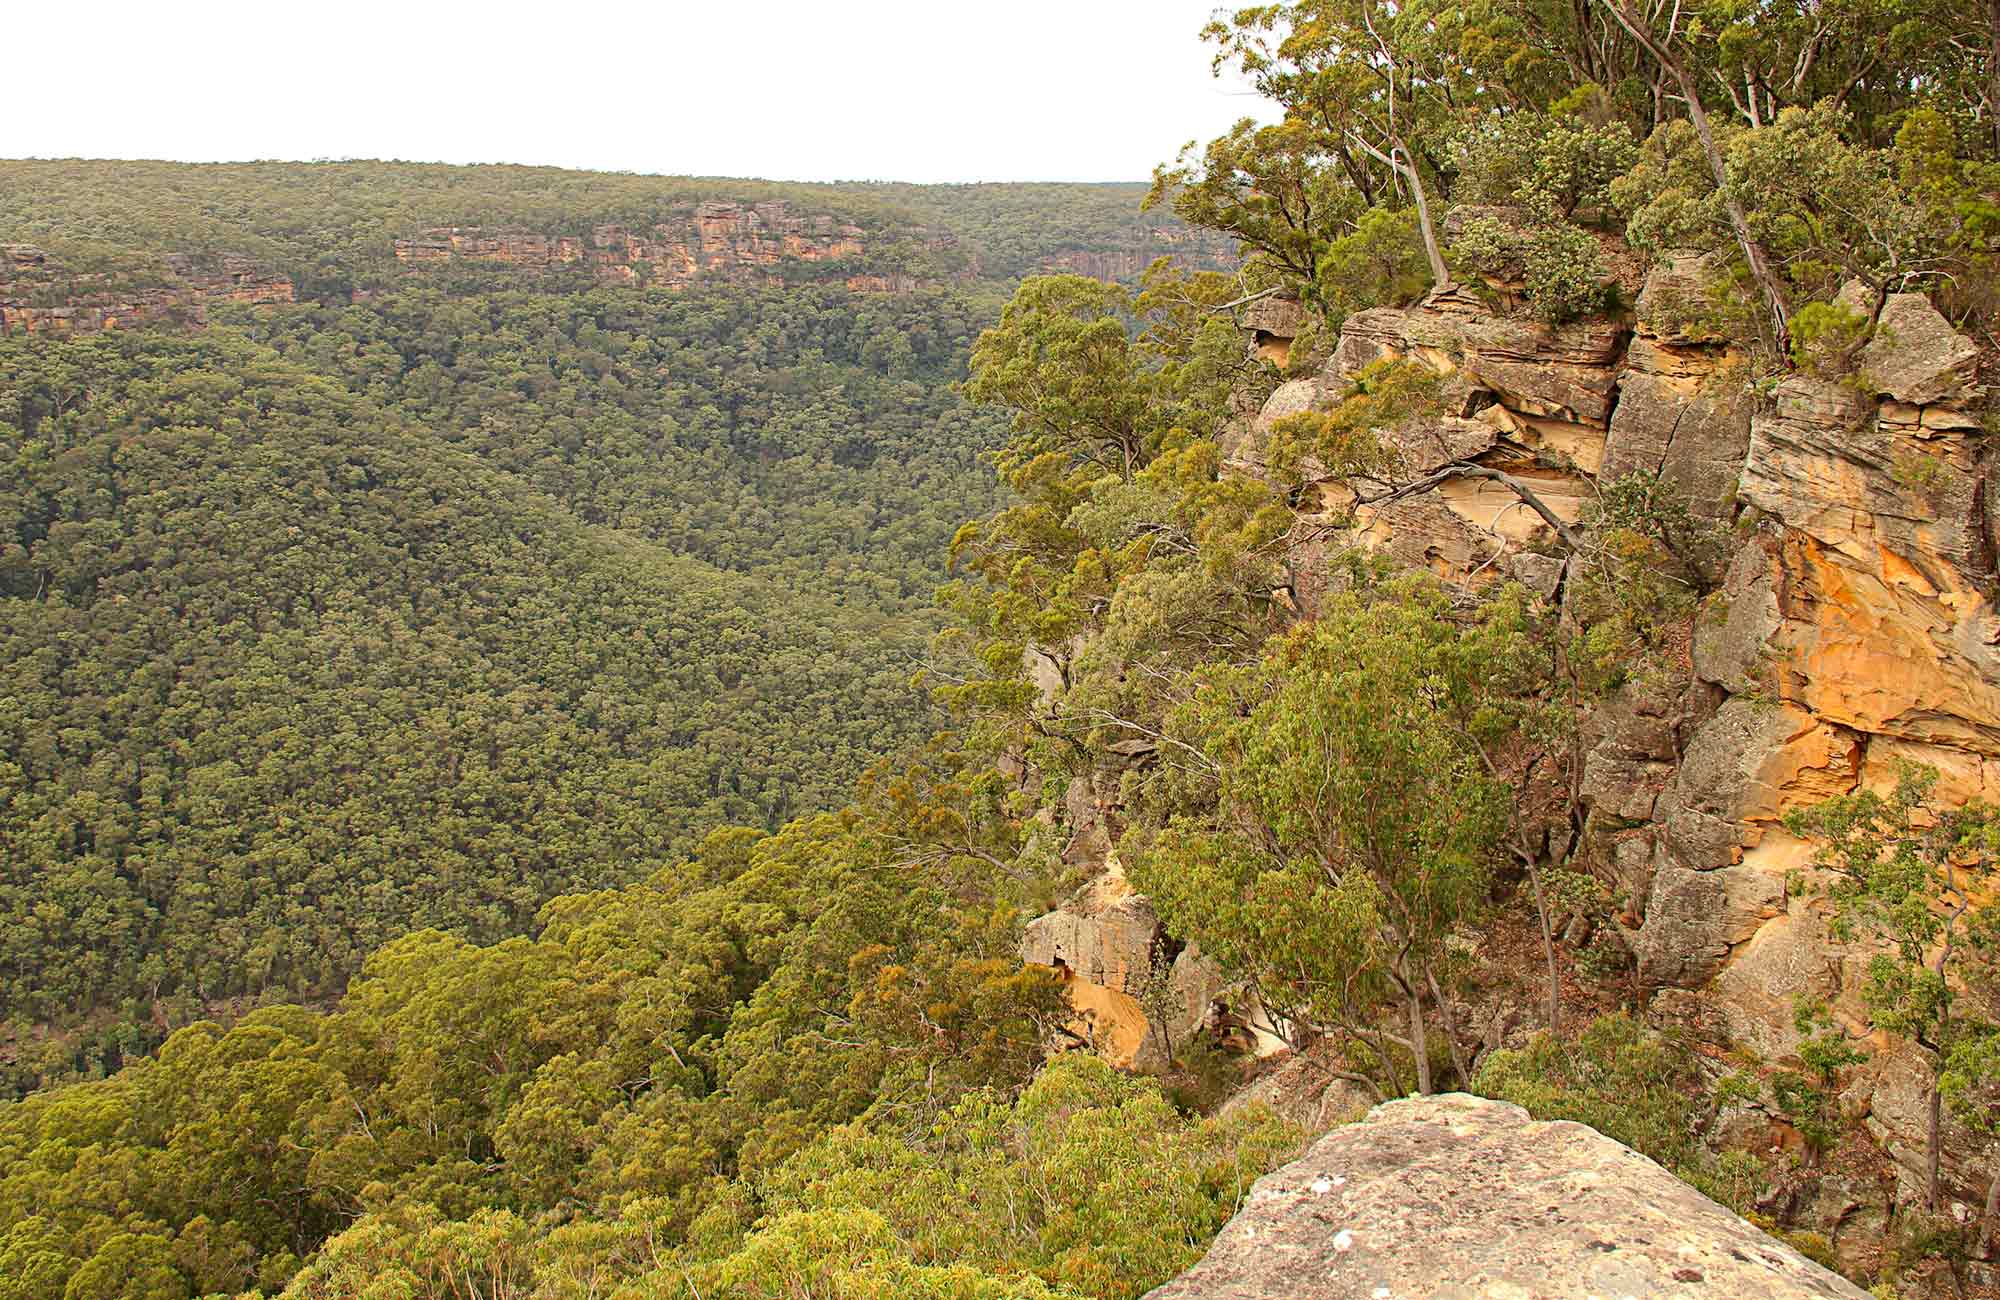 The view of a rocky cliff down the valley. Photo:John Yurasek